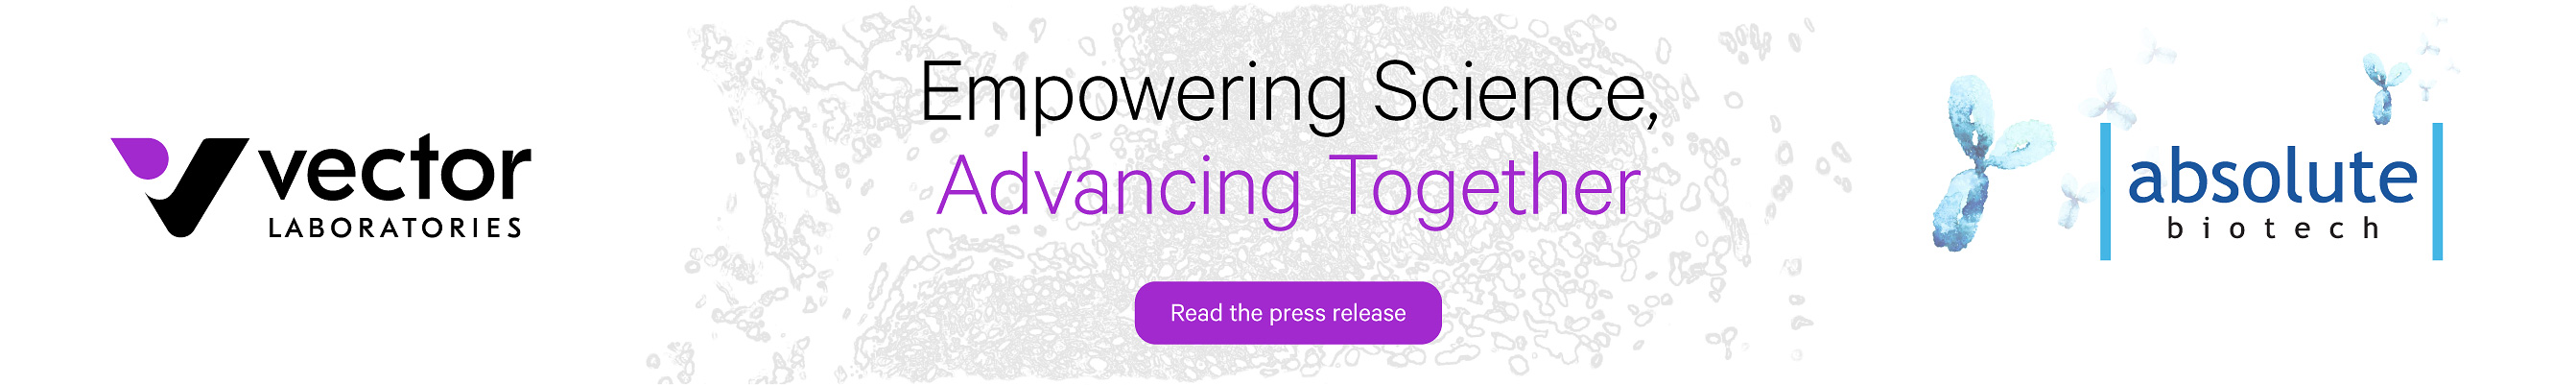 Empowering Science, Advancing Together